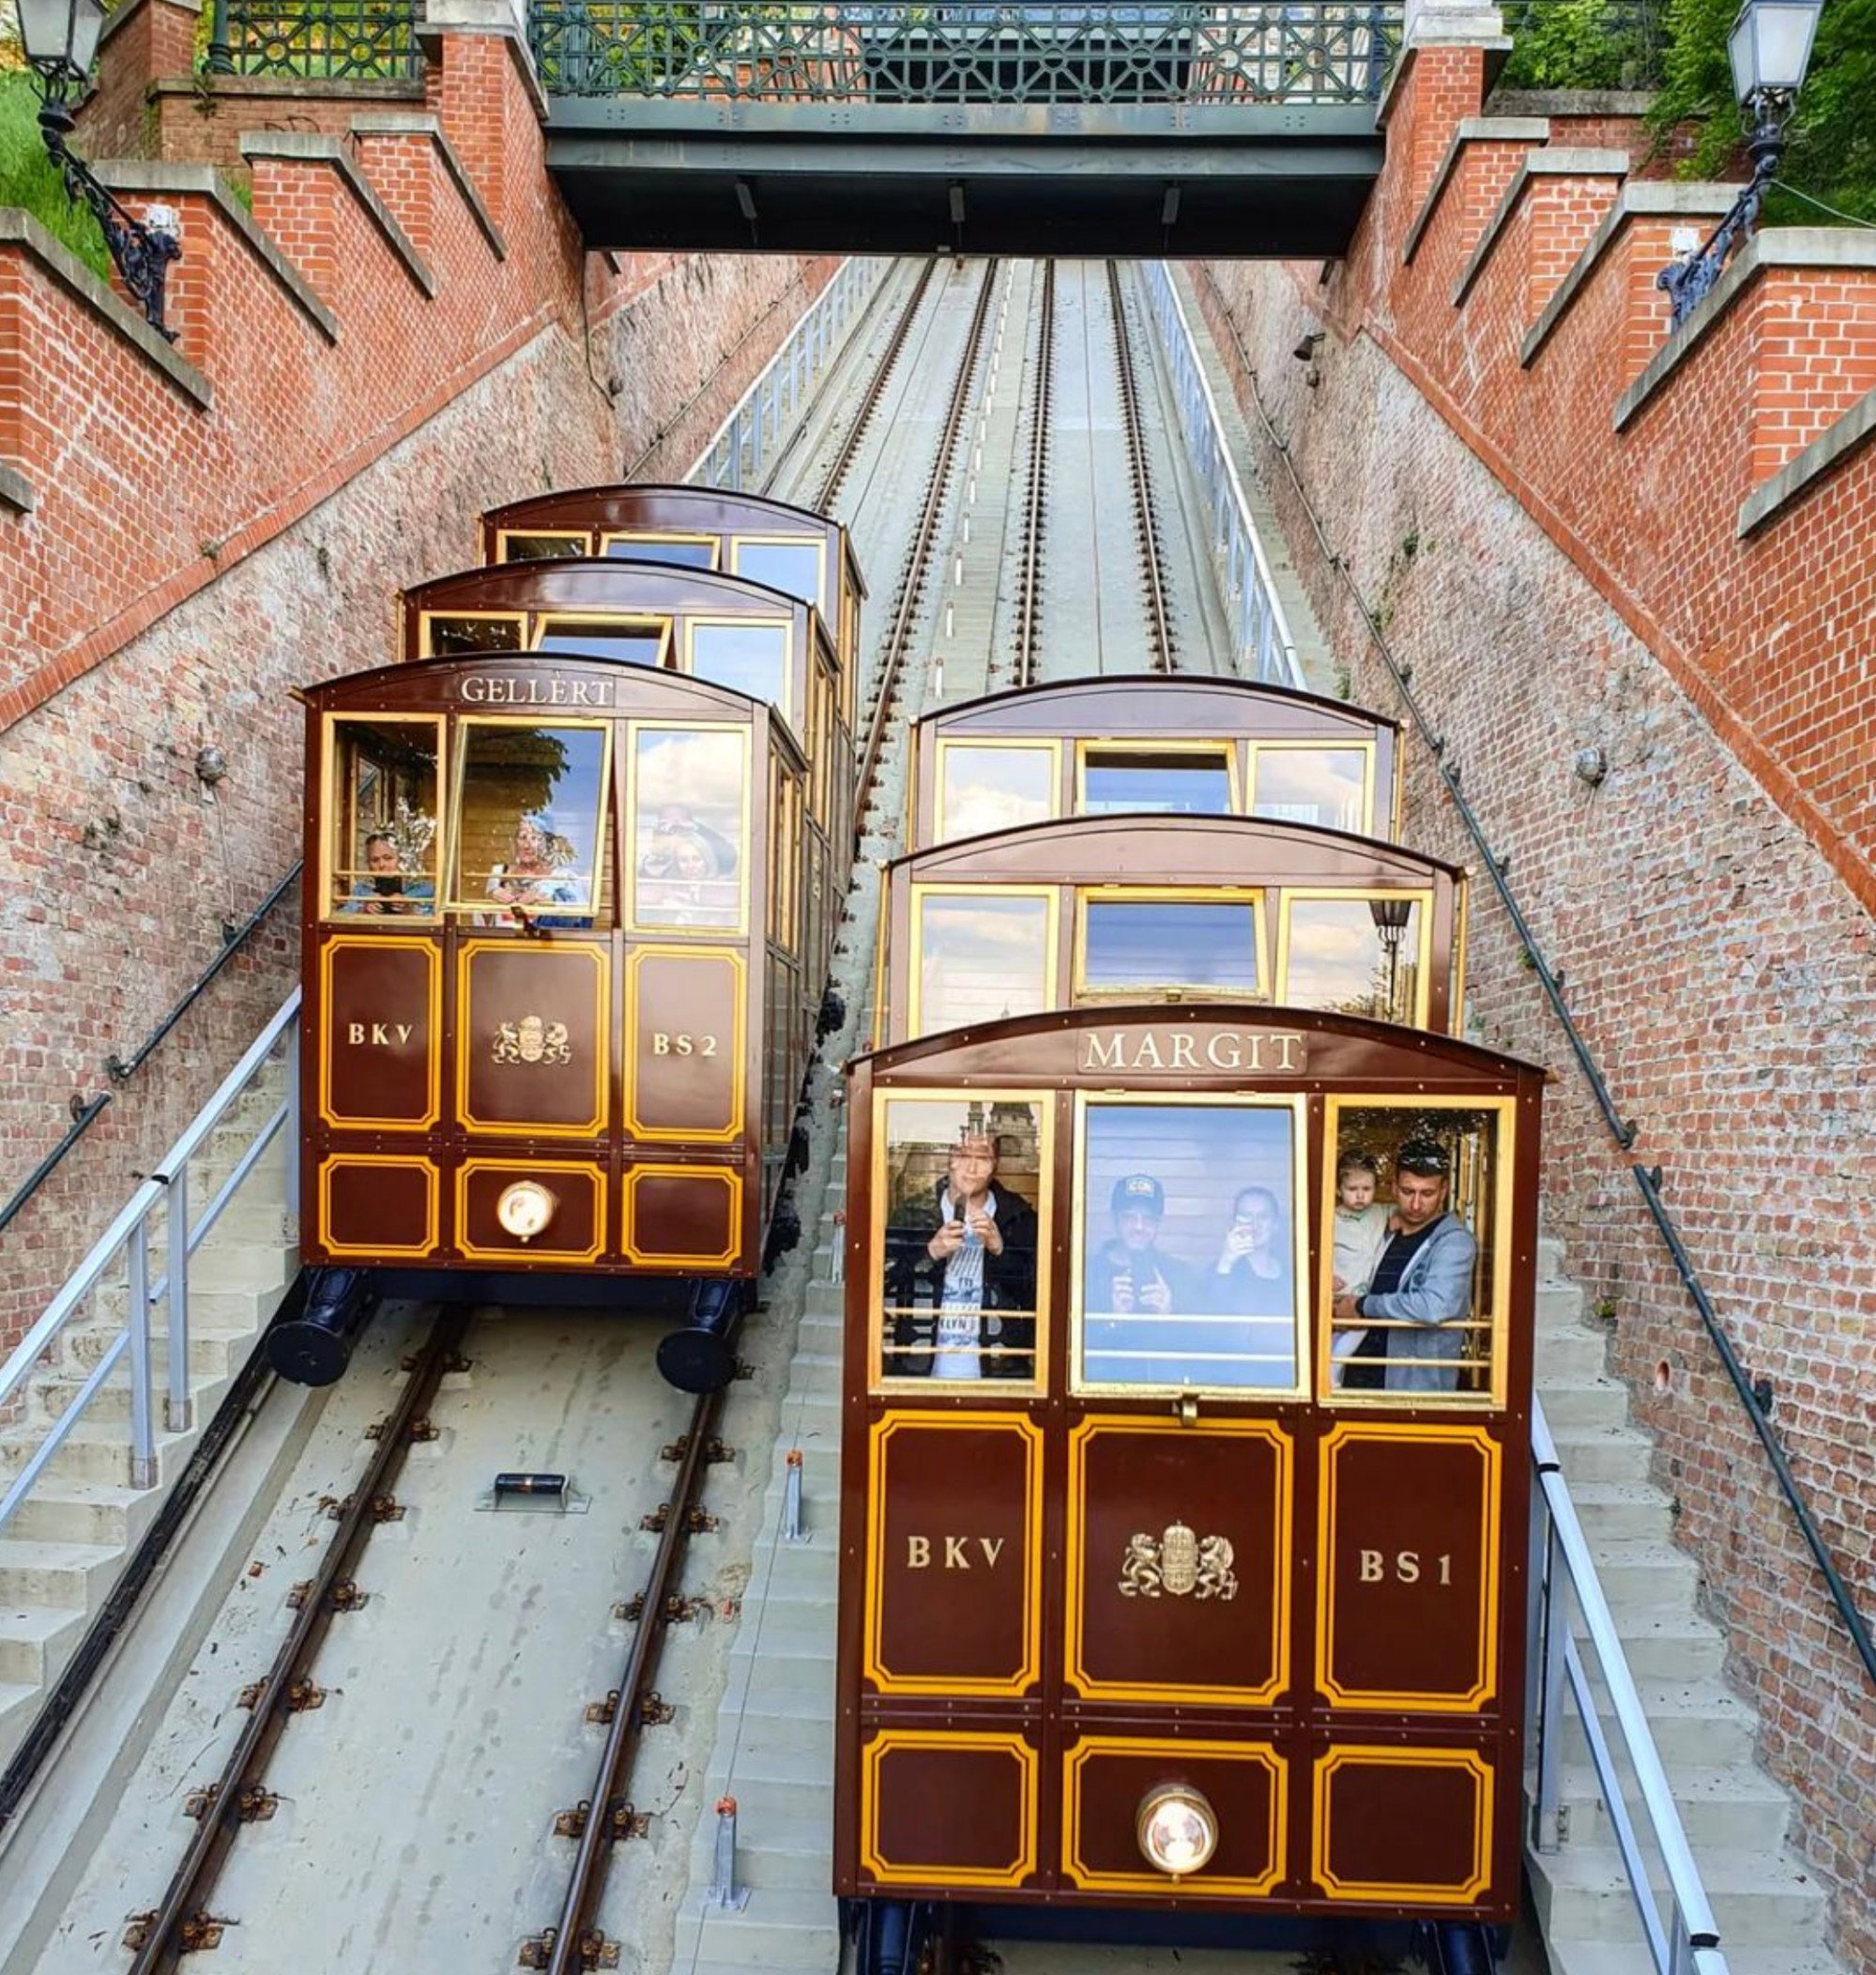 As Hong Kong Peak Tram reopens, 10 other fabulous funicular railways around the world to ride